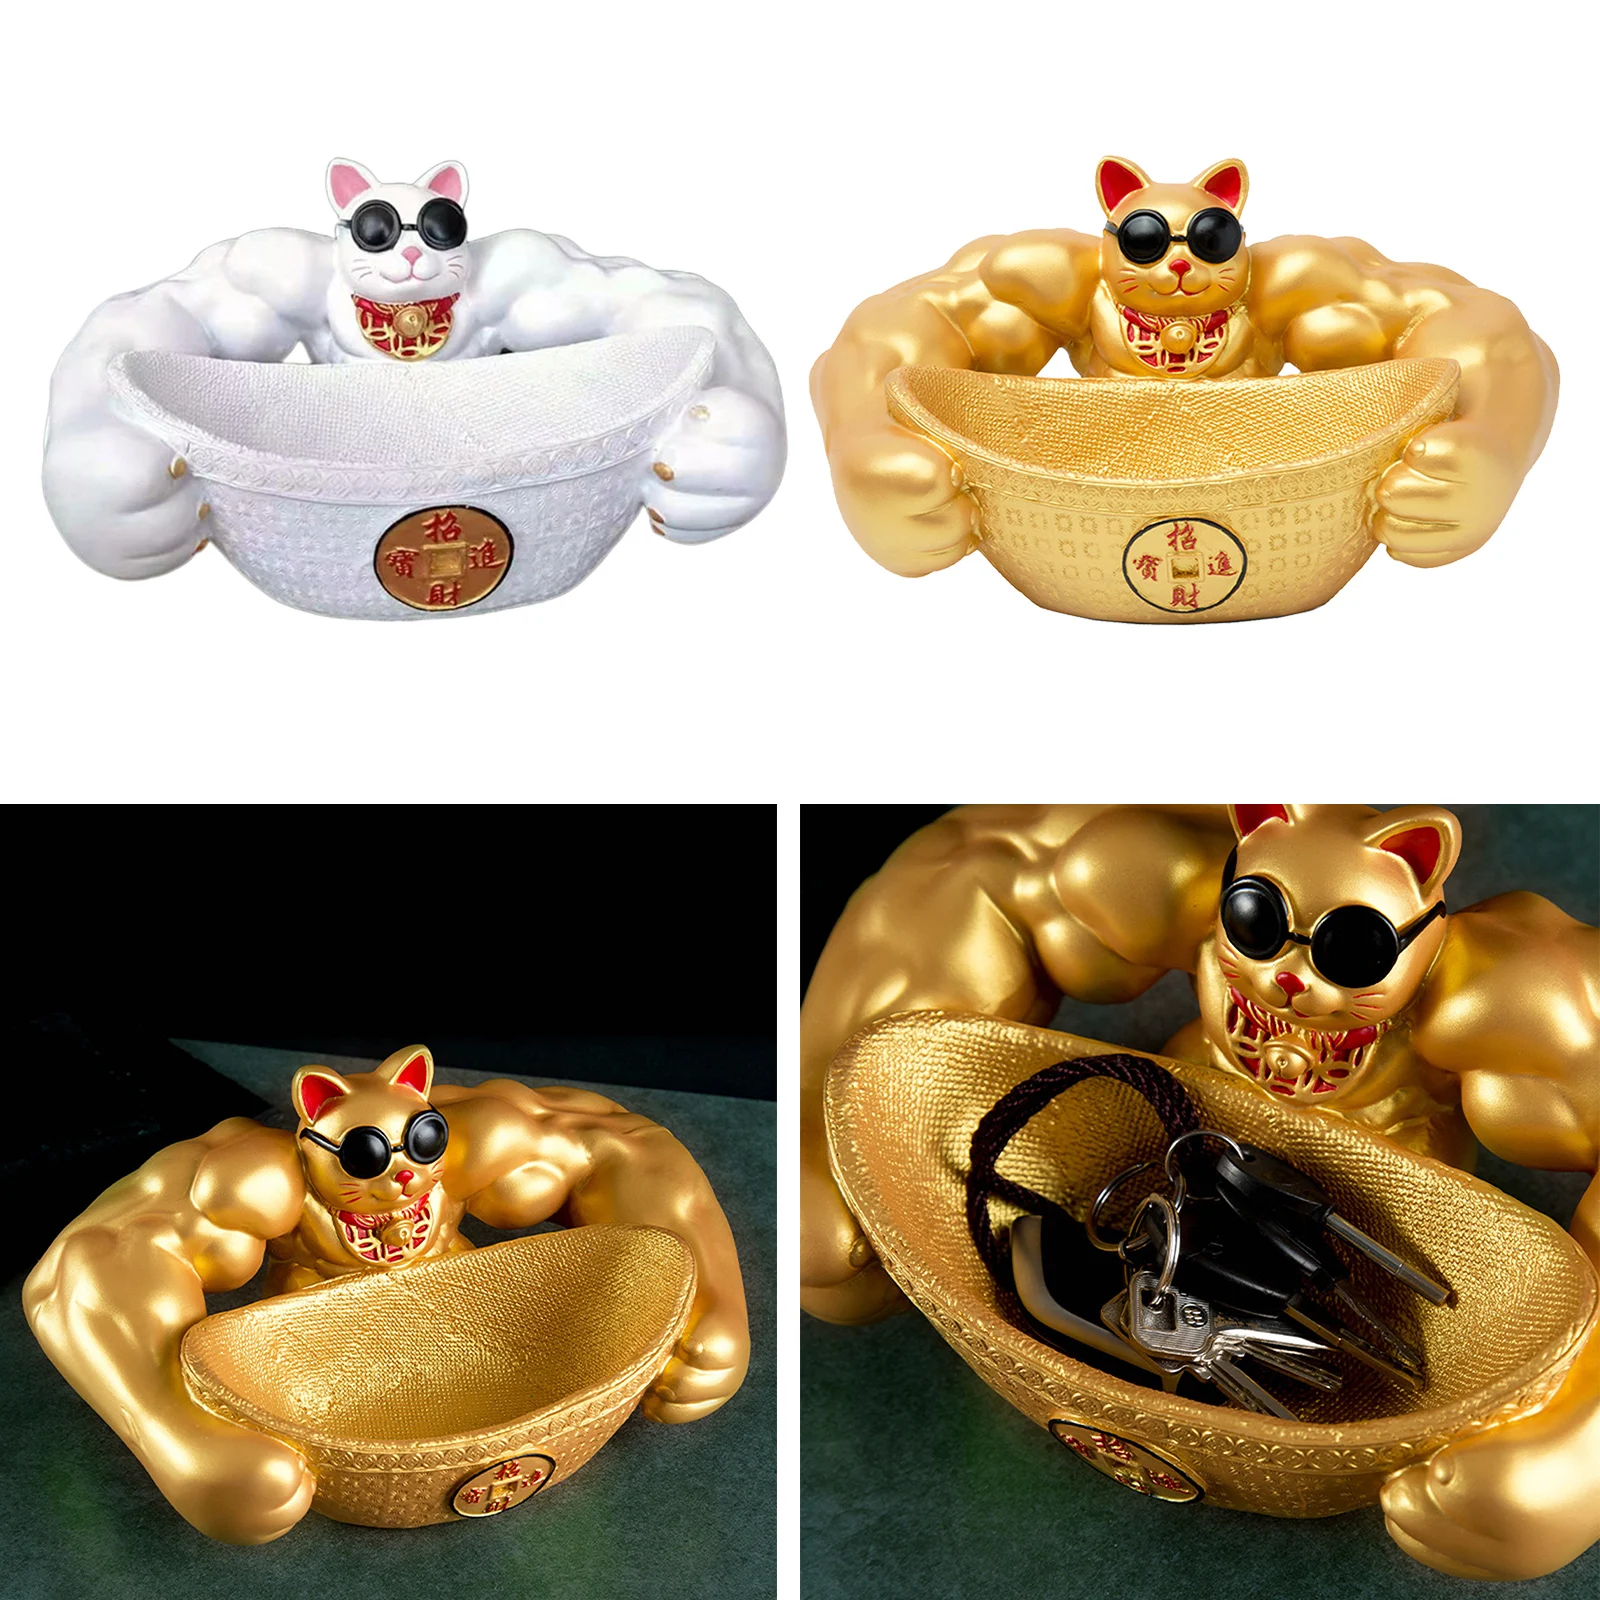 Lucky Cat Storage Tray Creative Living Room Decoration Animal Feng Shui Statue Muscle Arm Lucky Cat Storage Box Ornament